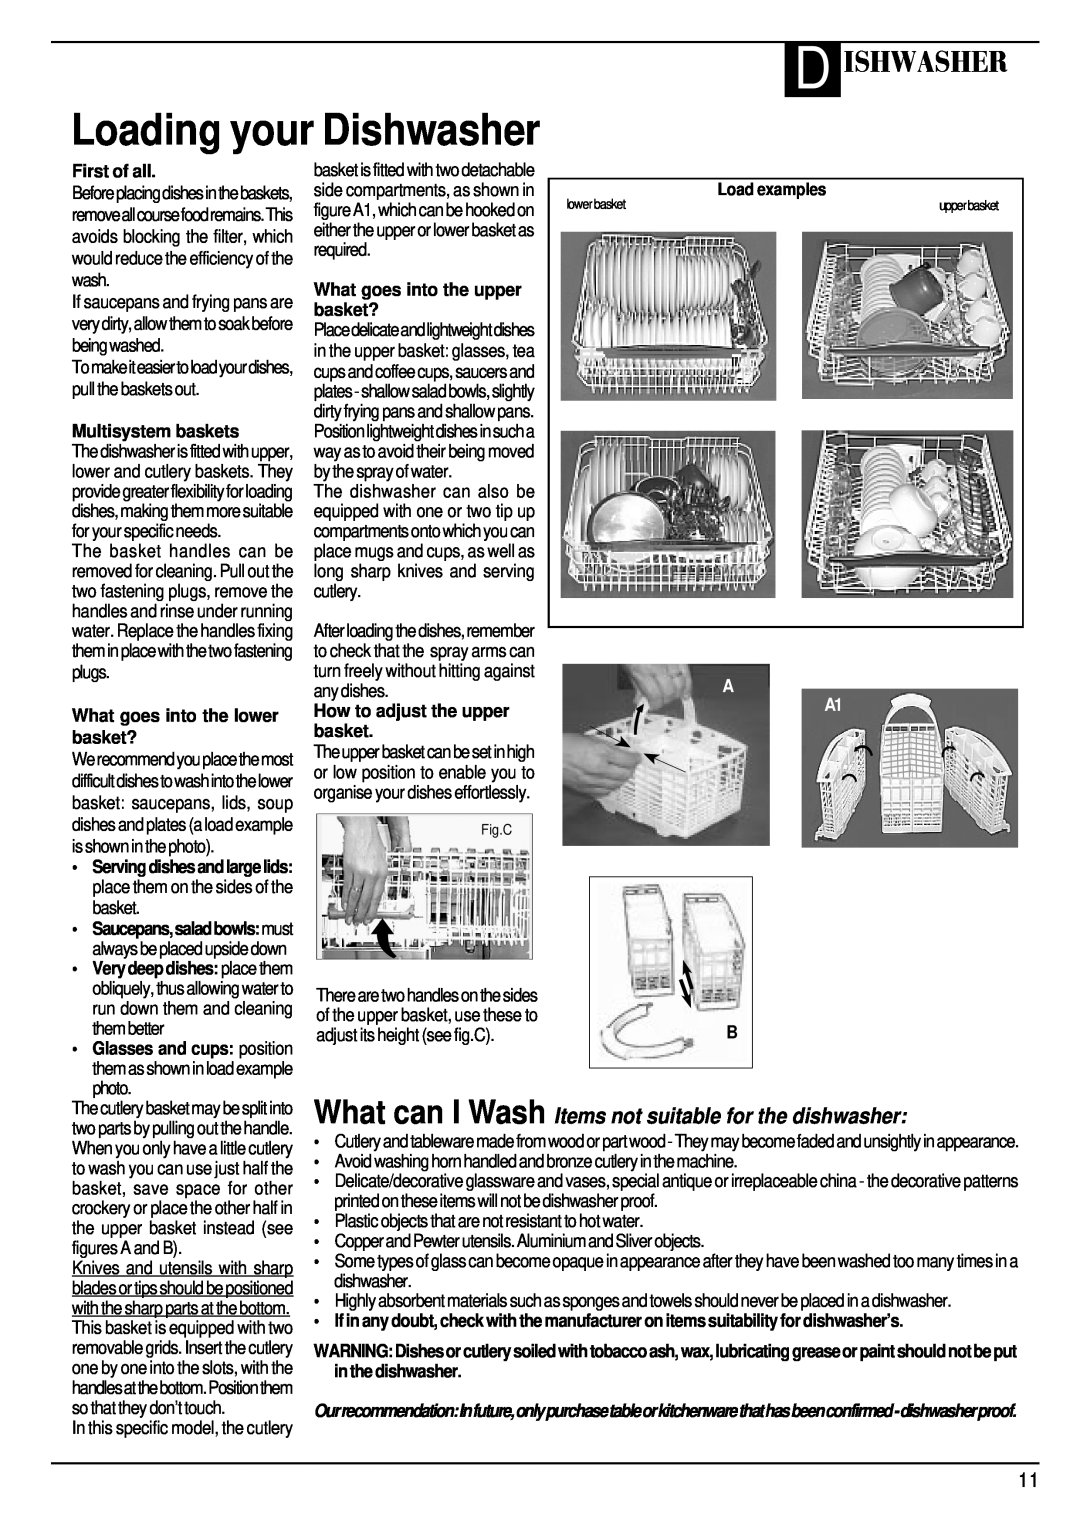 Hotpoint BFZ 680 manual Loading your Dishwasher, Ishwasher, What can I Wash Items not suitable for the dishwasher 